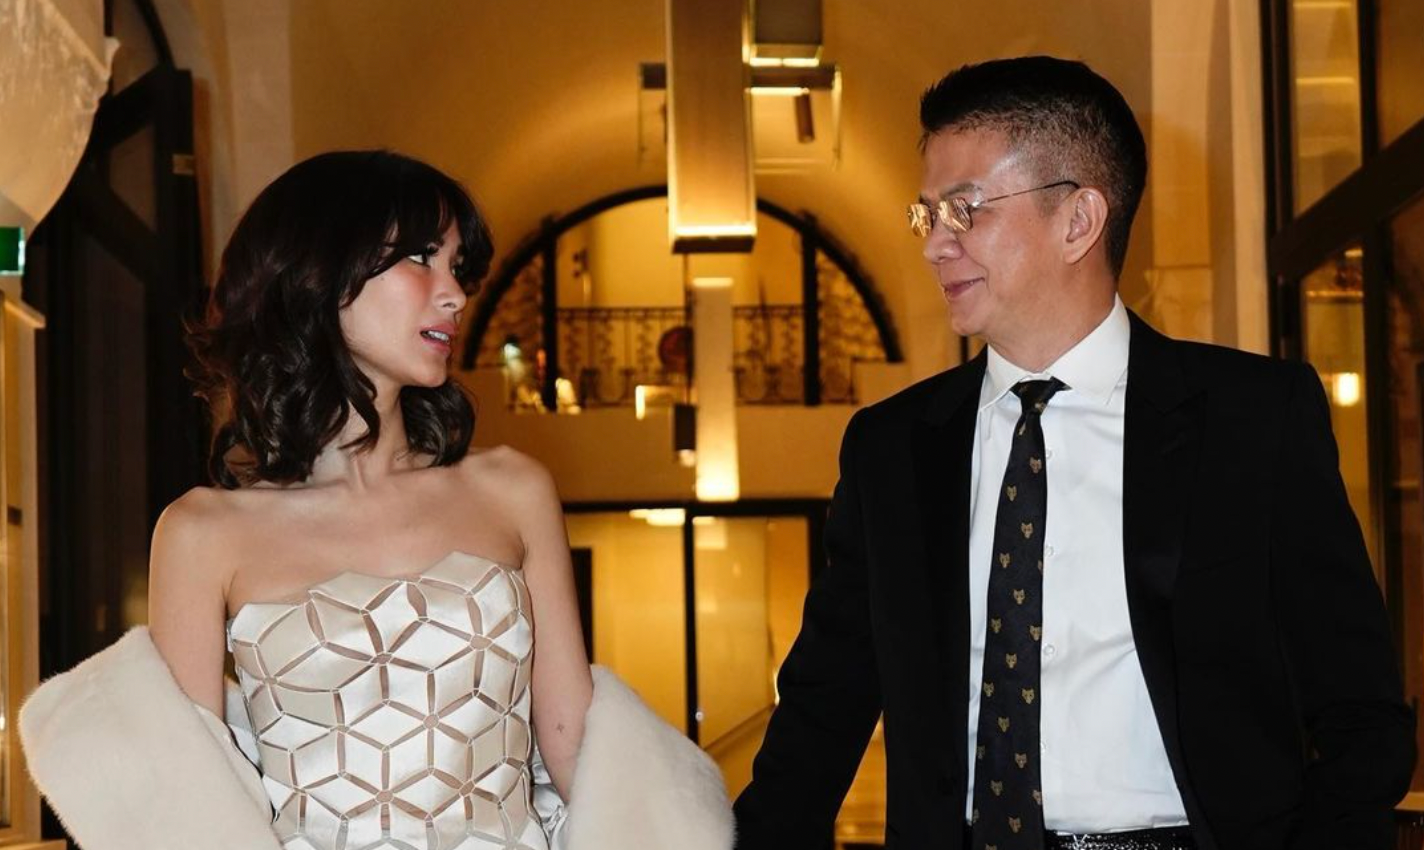 Heart Evangelista and Chiz Escudero to Renew Wedding Vows This February